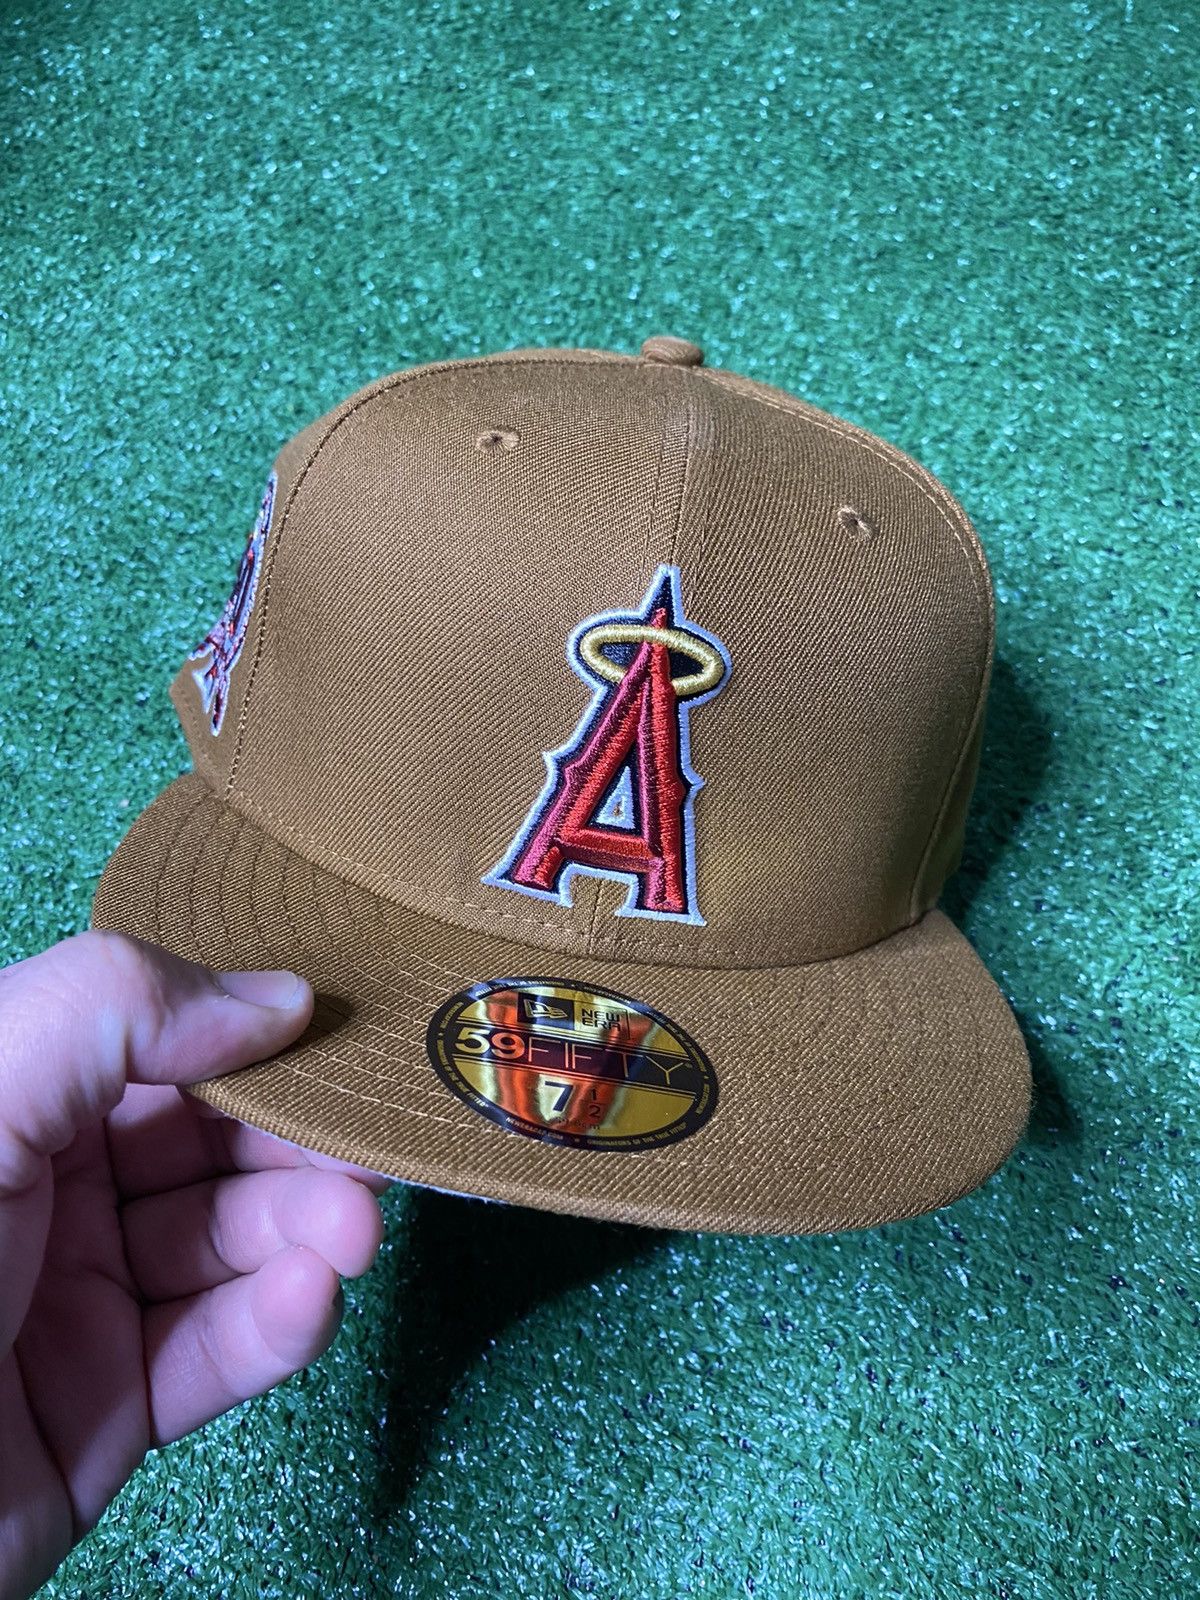 New Era ANGELS NEW ERA BOURBON BROWN HAT 7 1/2 Size ONE SIZE - 2 Preview